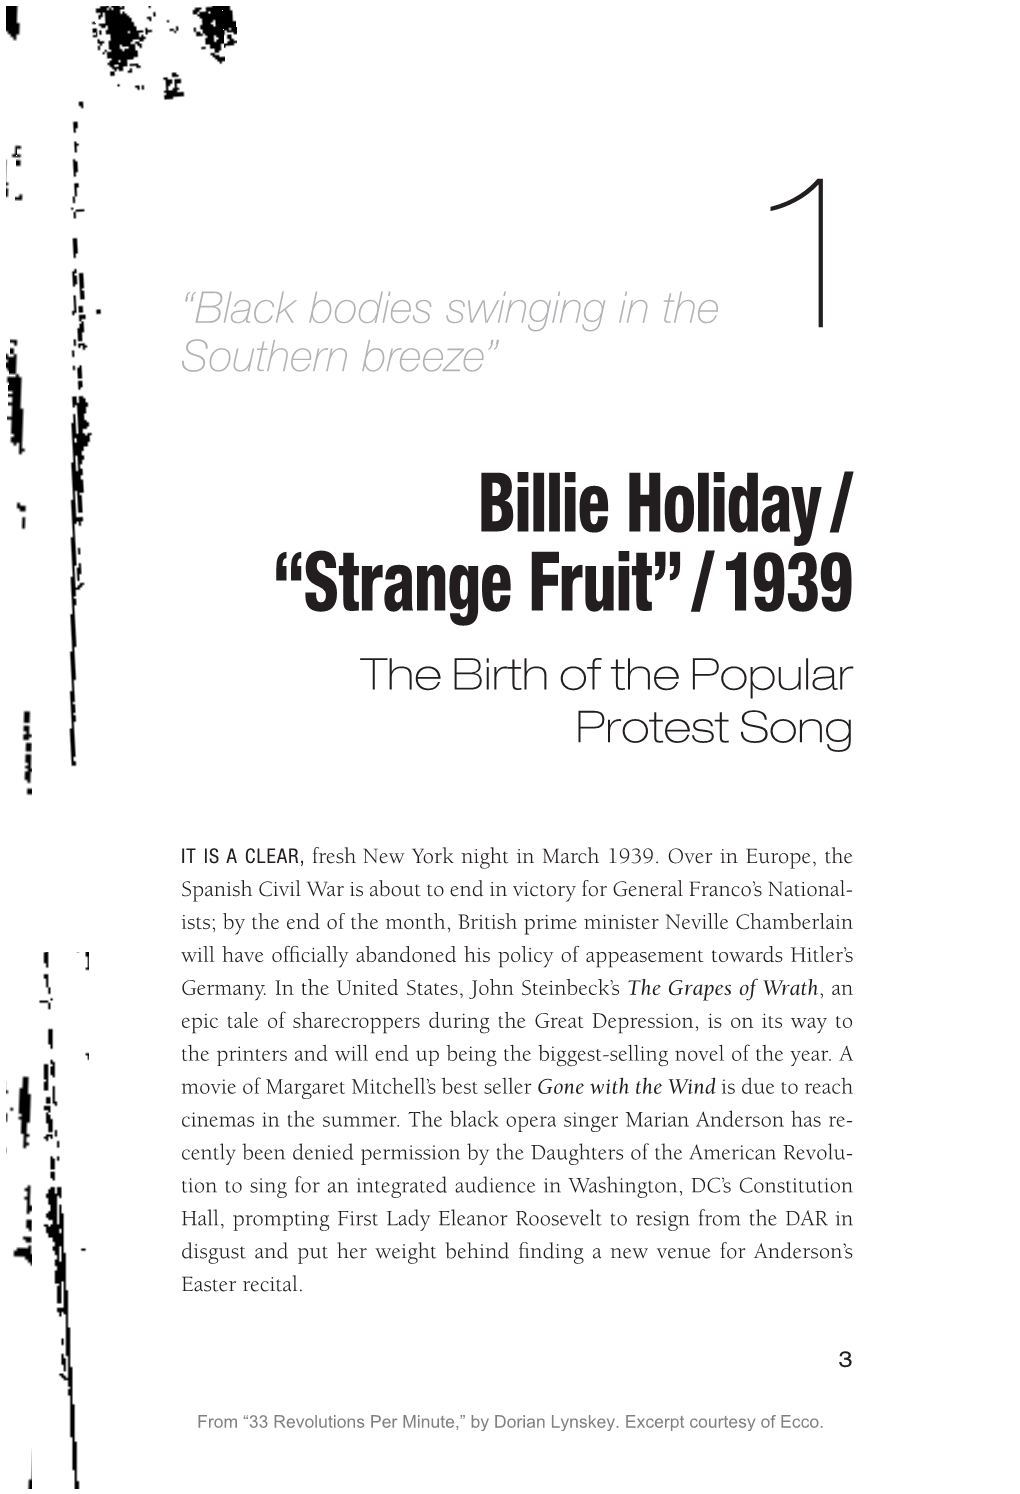 Billie Holiday / “Strange Fruit” / 1939 the Birth of the Popular Protest Song